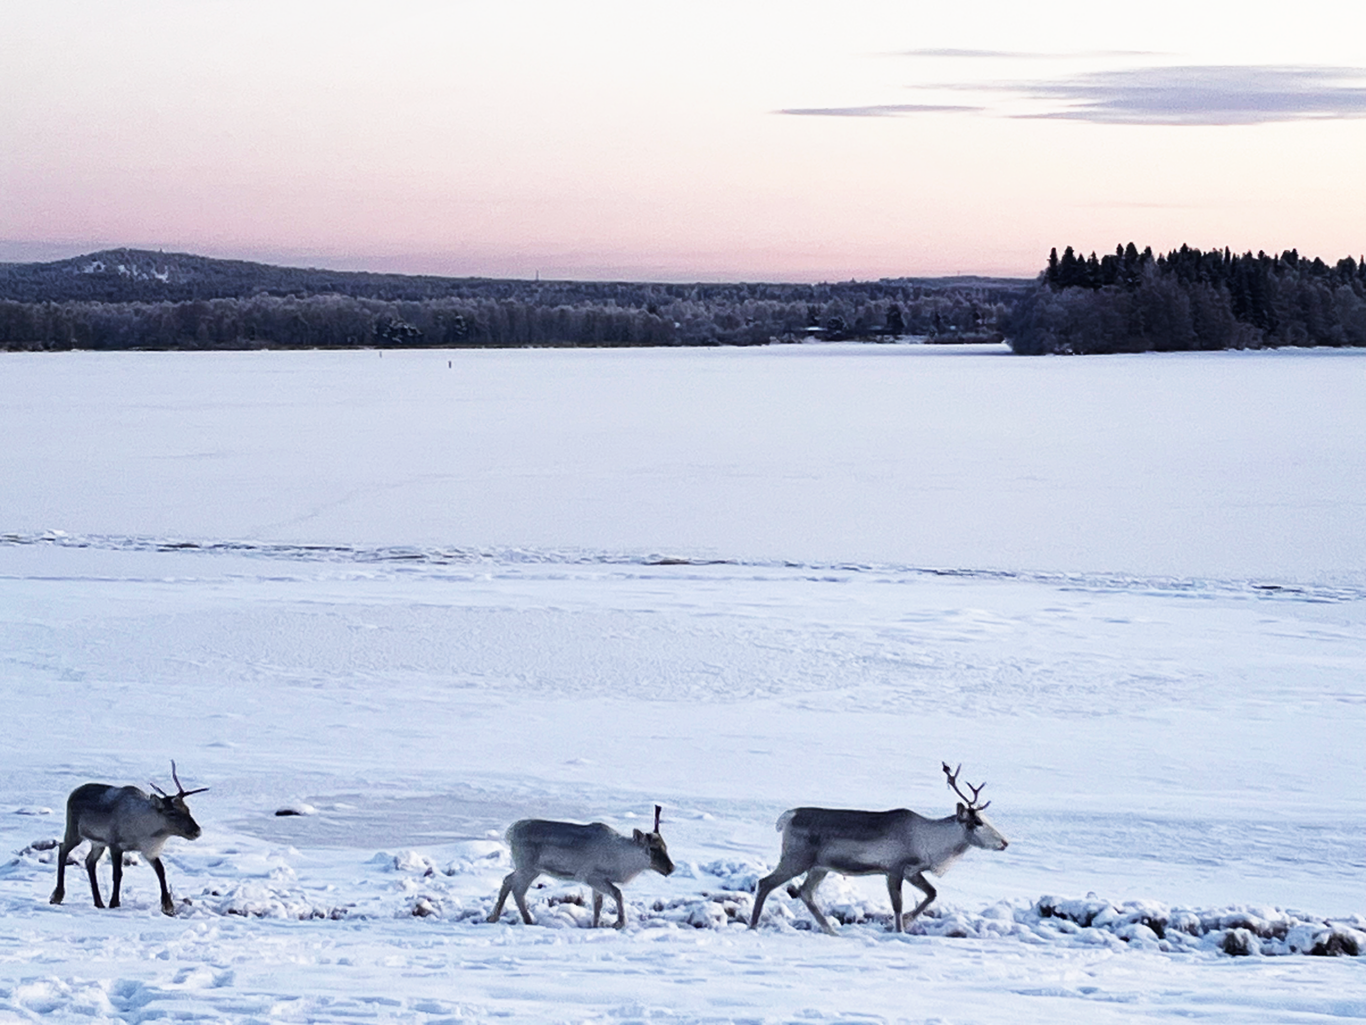 Reindeer on frozen river in the city of Rovaniemi, Finland. Photo by Ria-Maria Adams.